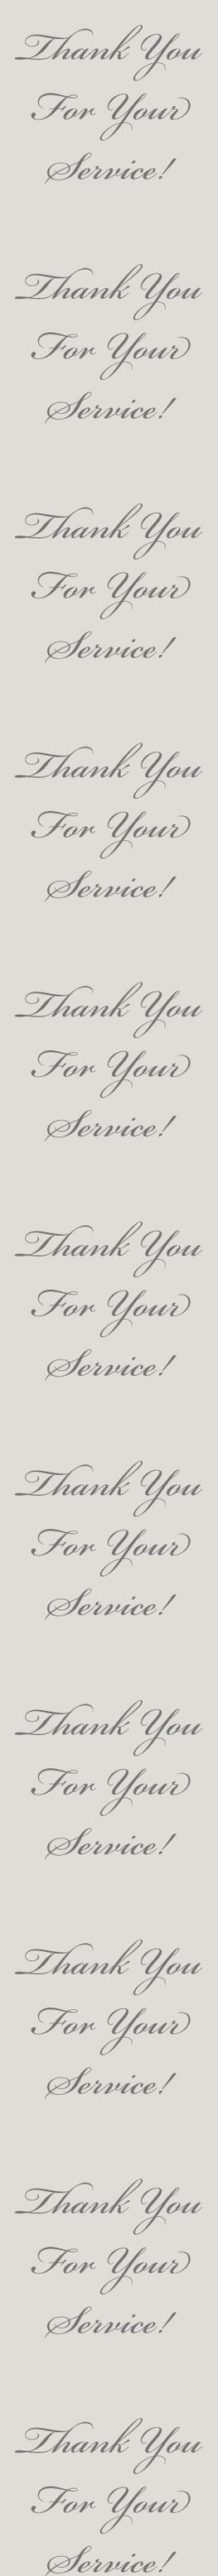 thank_you_for_service_3100.jpg